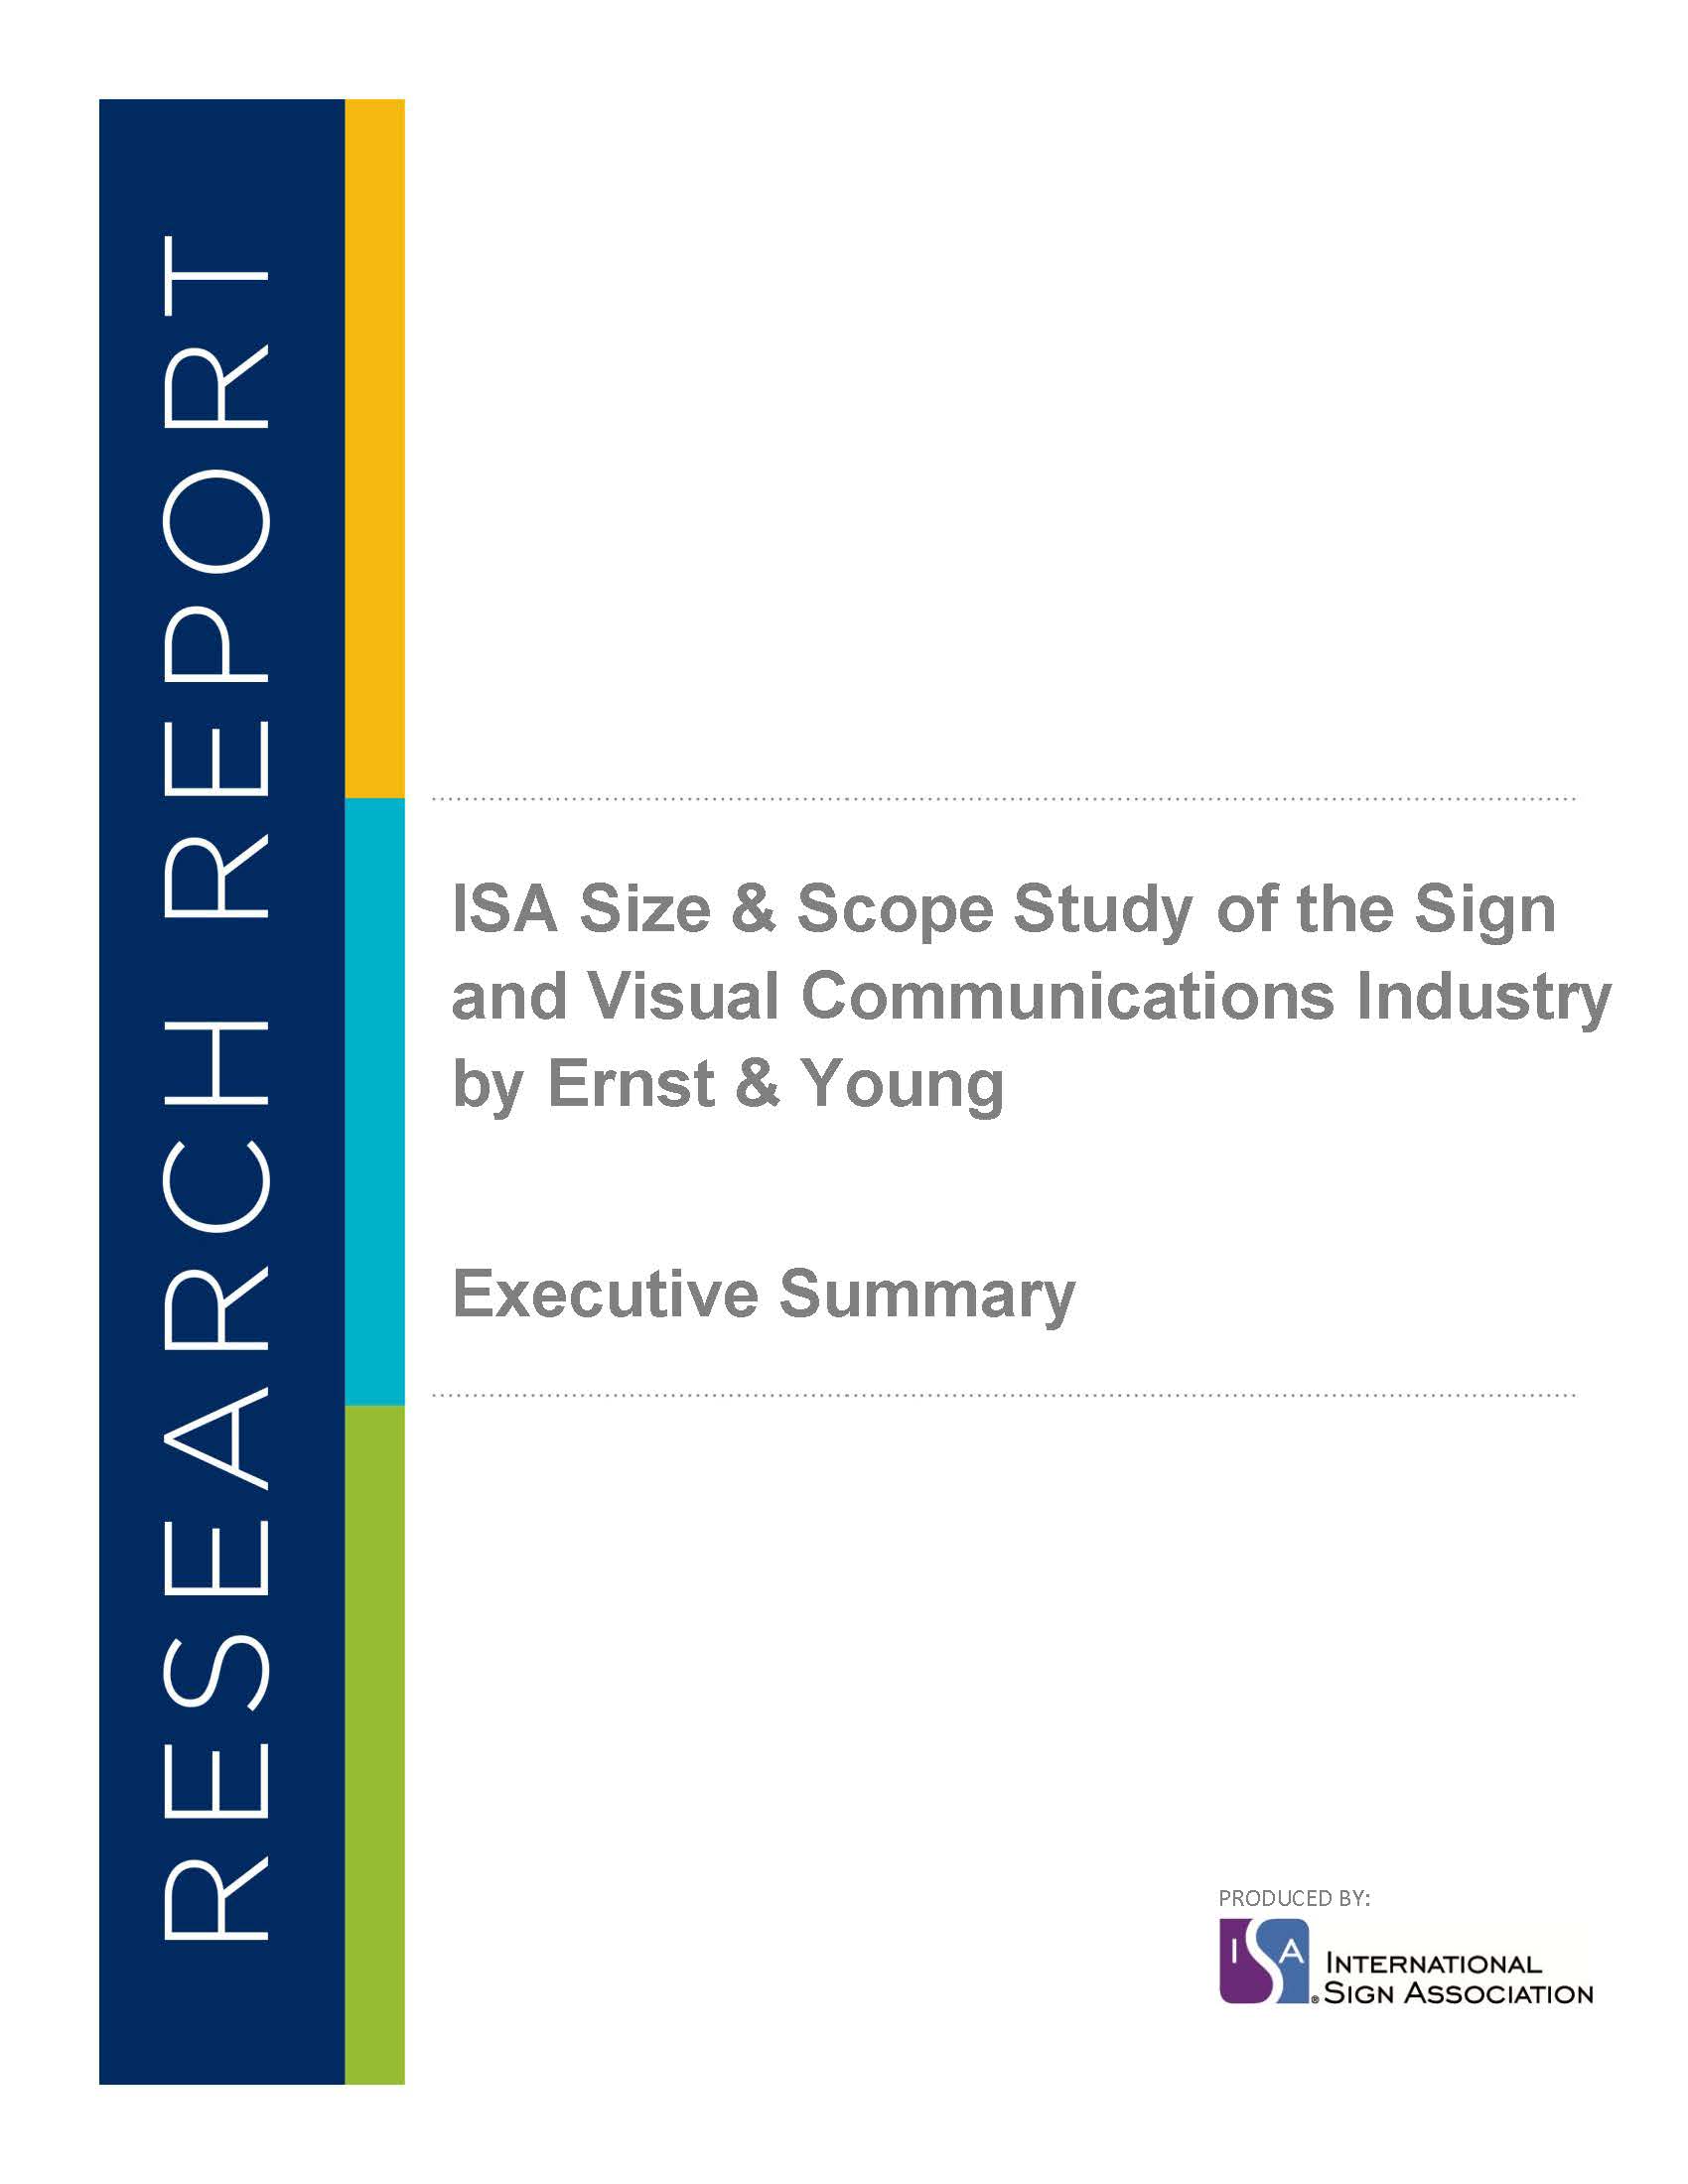 ISA Size & Scope Study of the Sign and Visual Communications Industry by Ernst & Young - Executive Summary